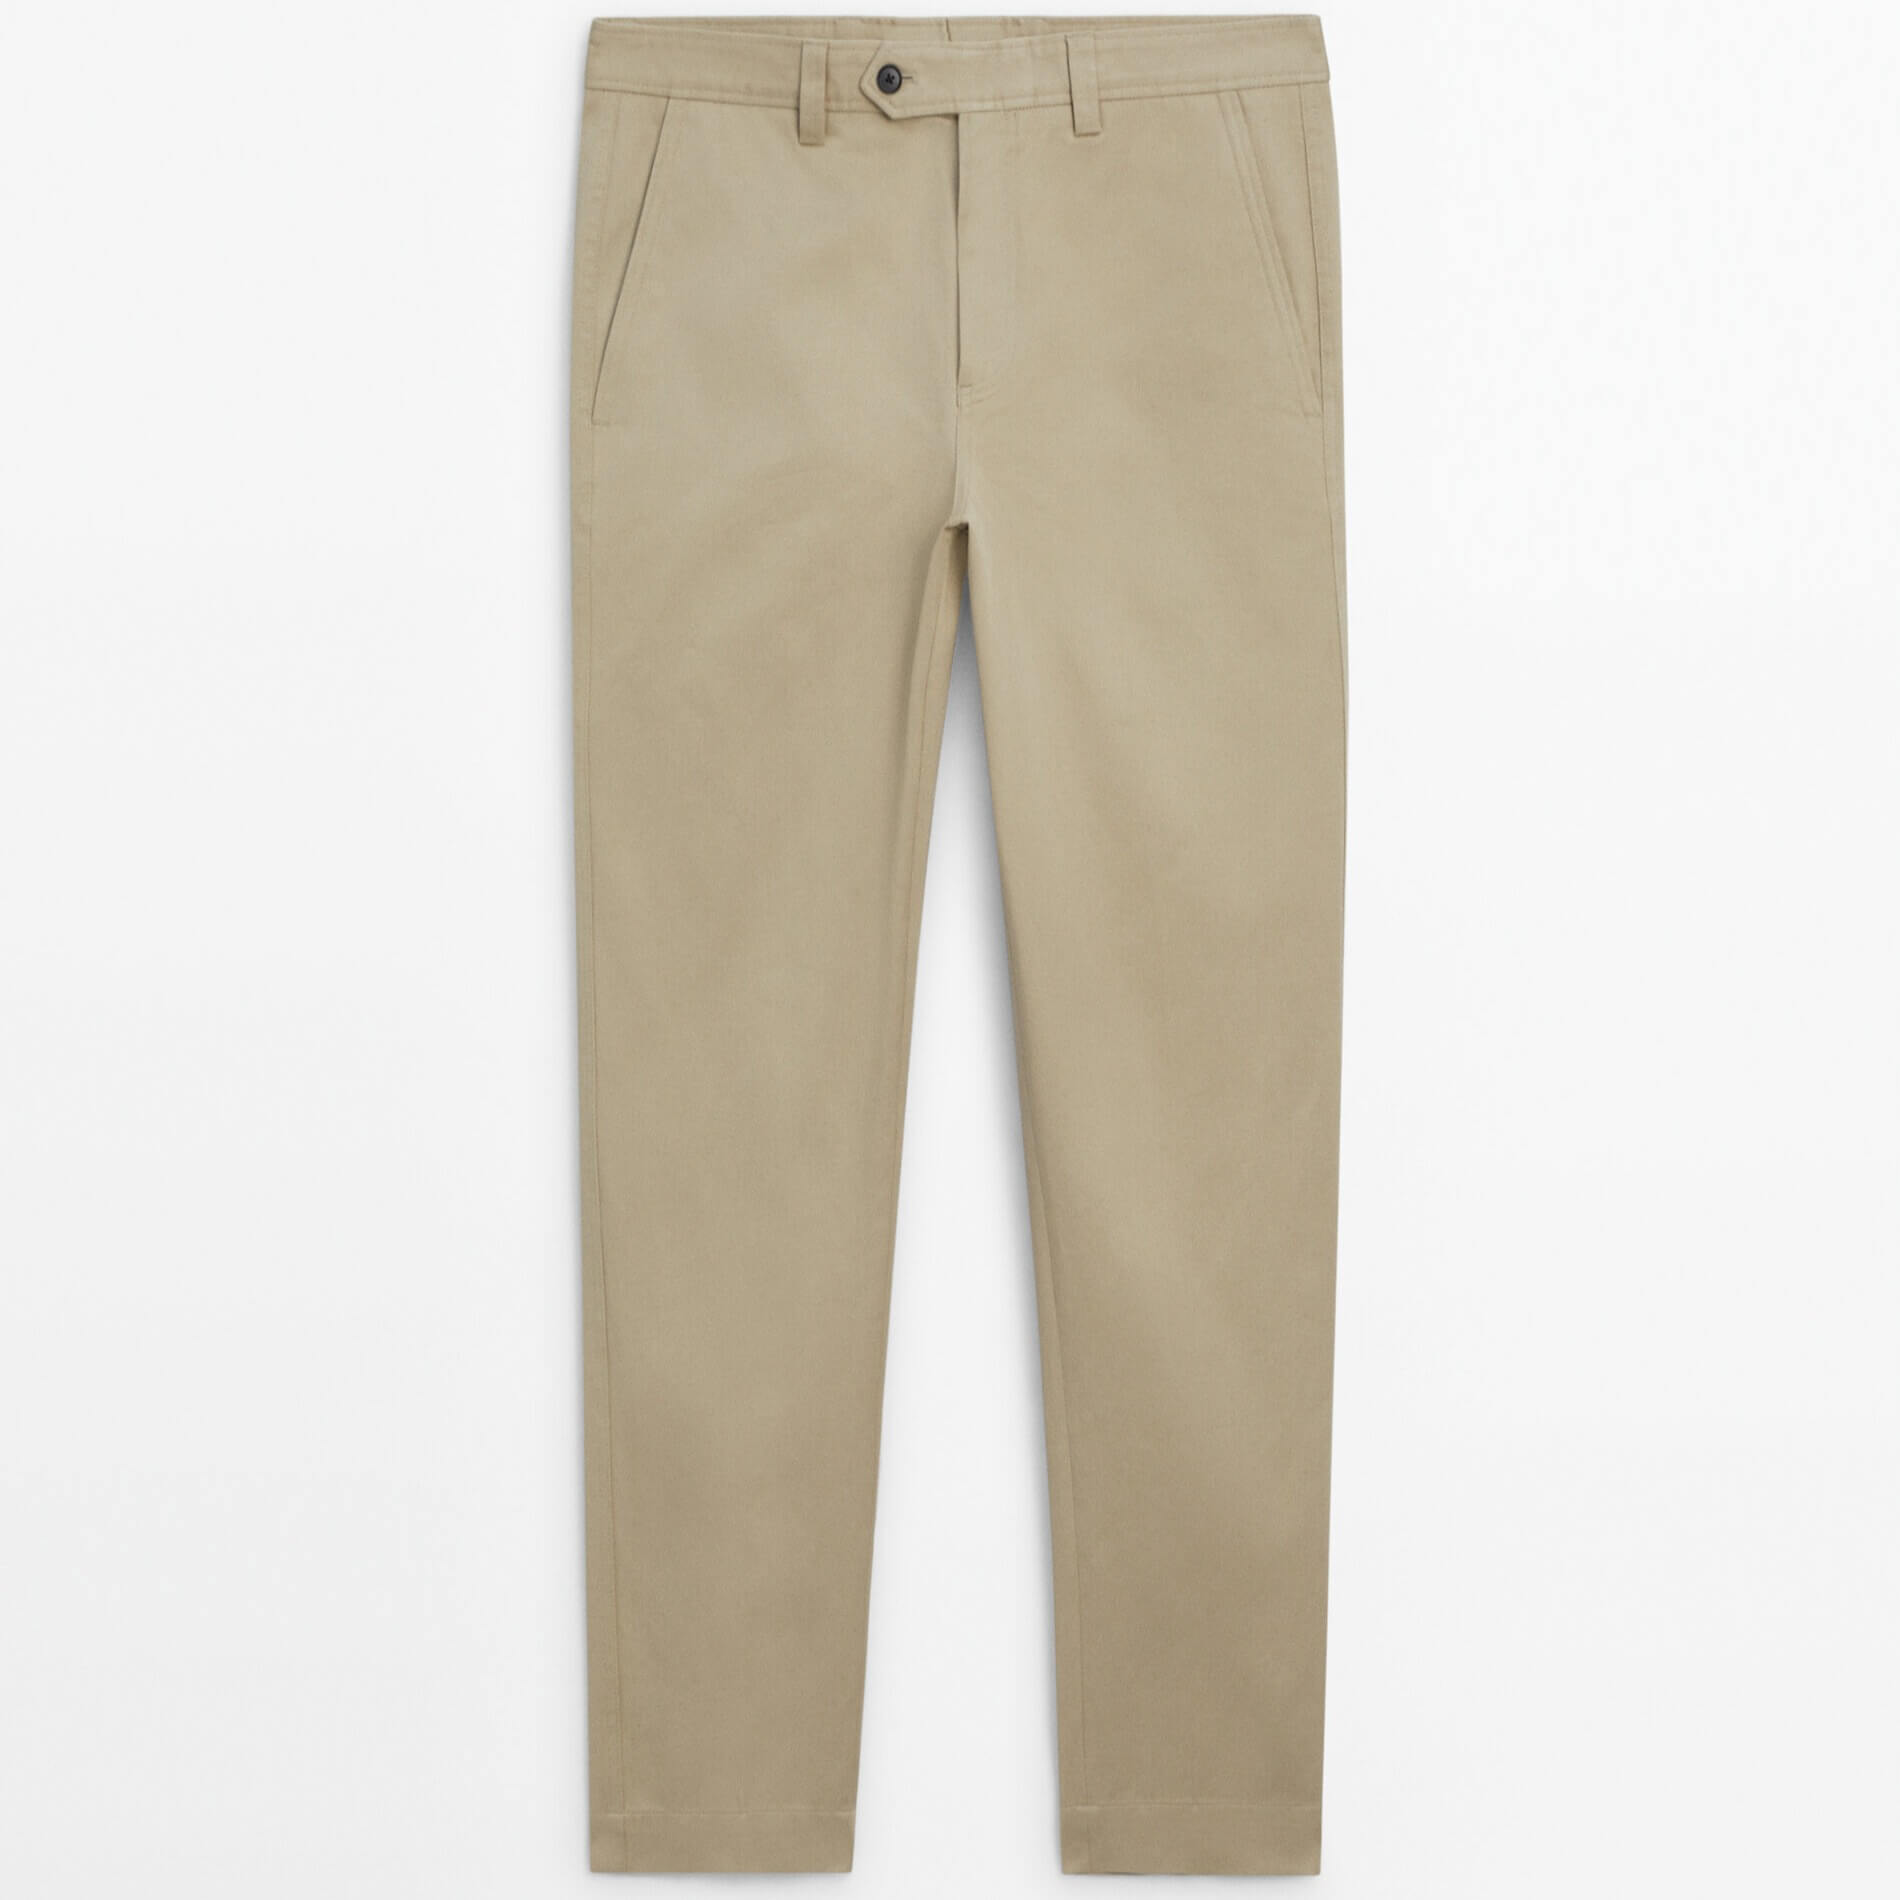 Брюки Massimo Dutti Relaxed Fit Belted Chino, бежевый брюки чинос massimo dutti relaxed fit wool limited edition зелёный